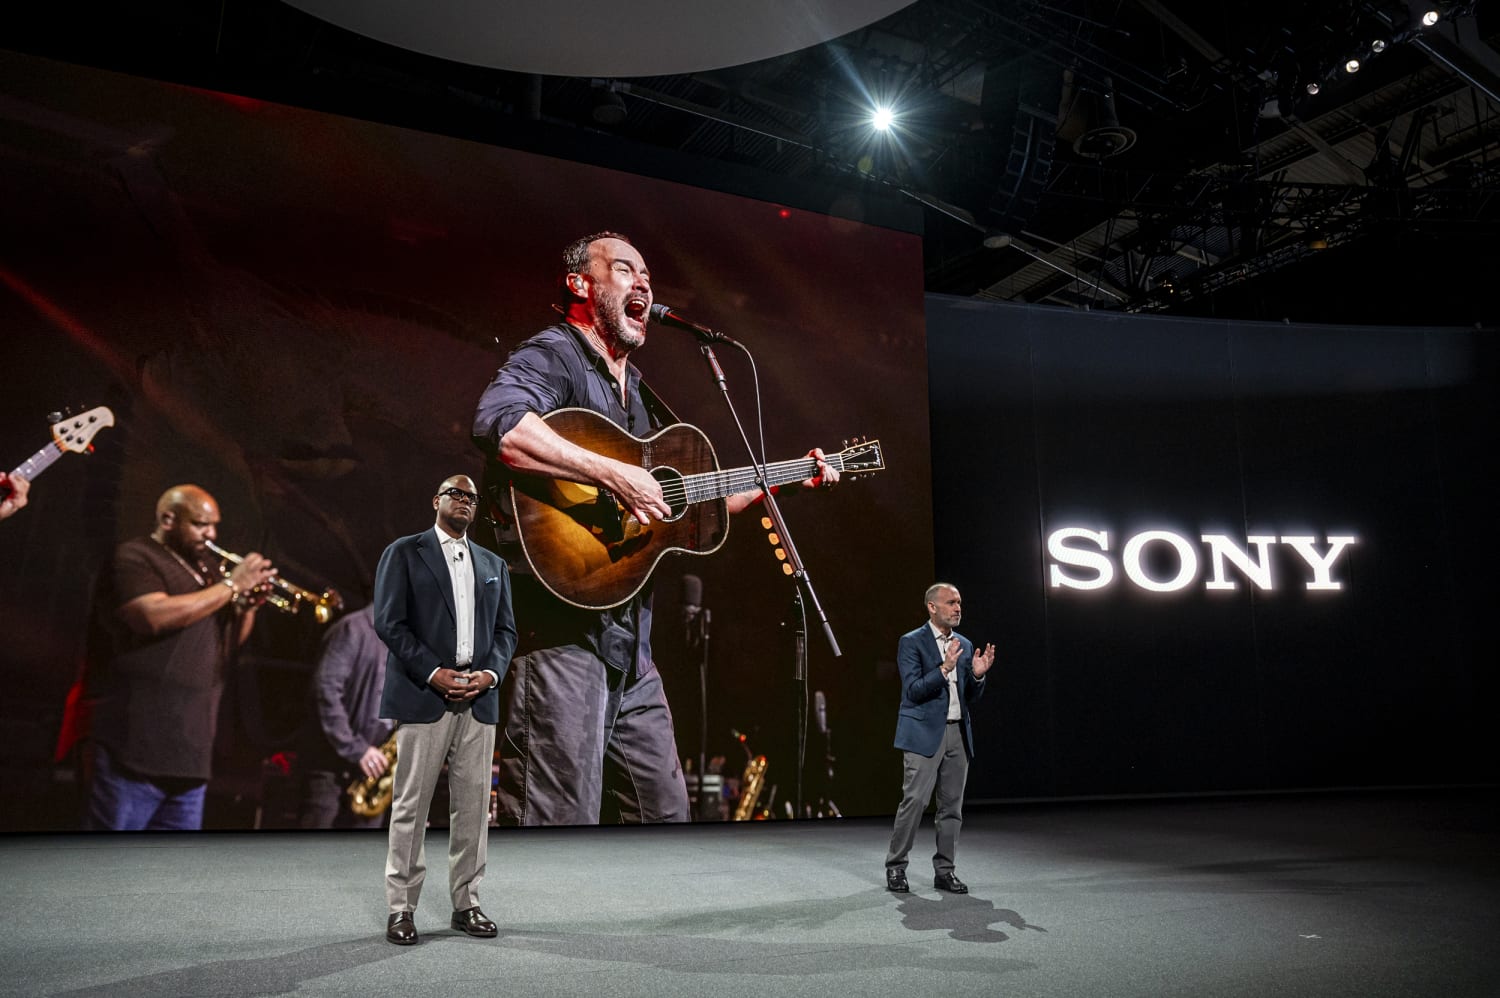 Sony Music Group warns more than 700 companies against using its content to train artificial intelligence